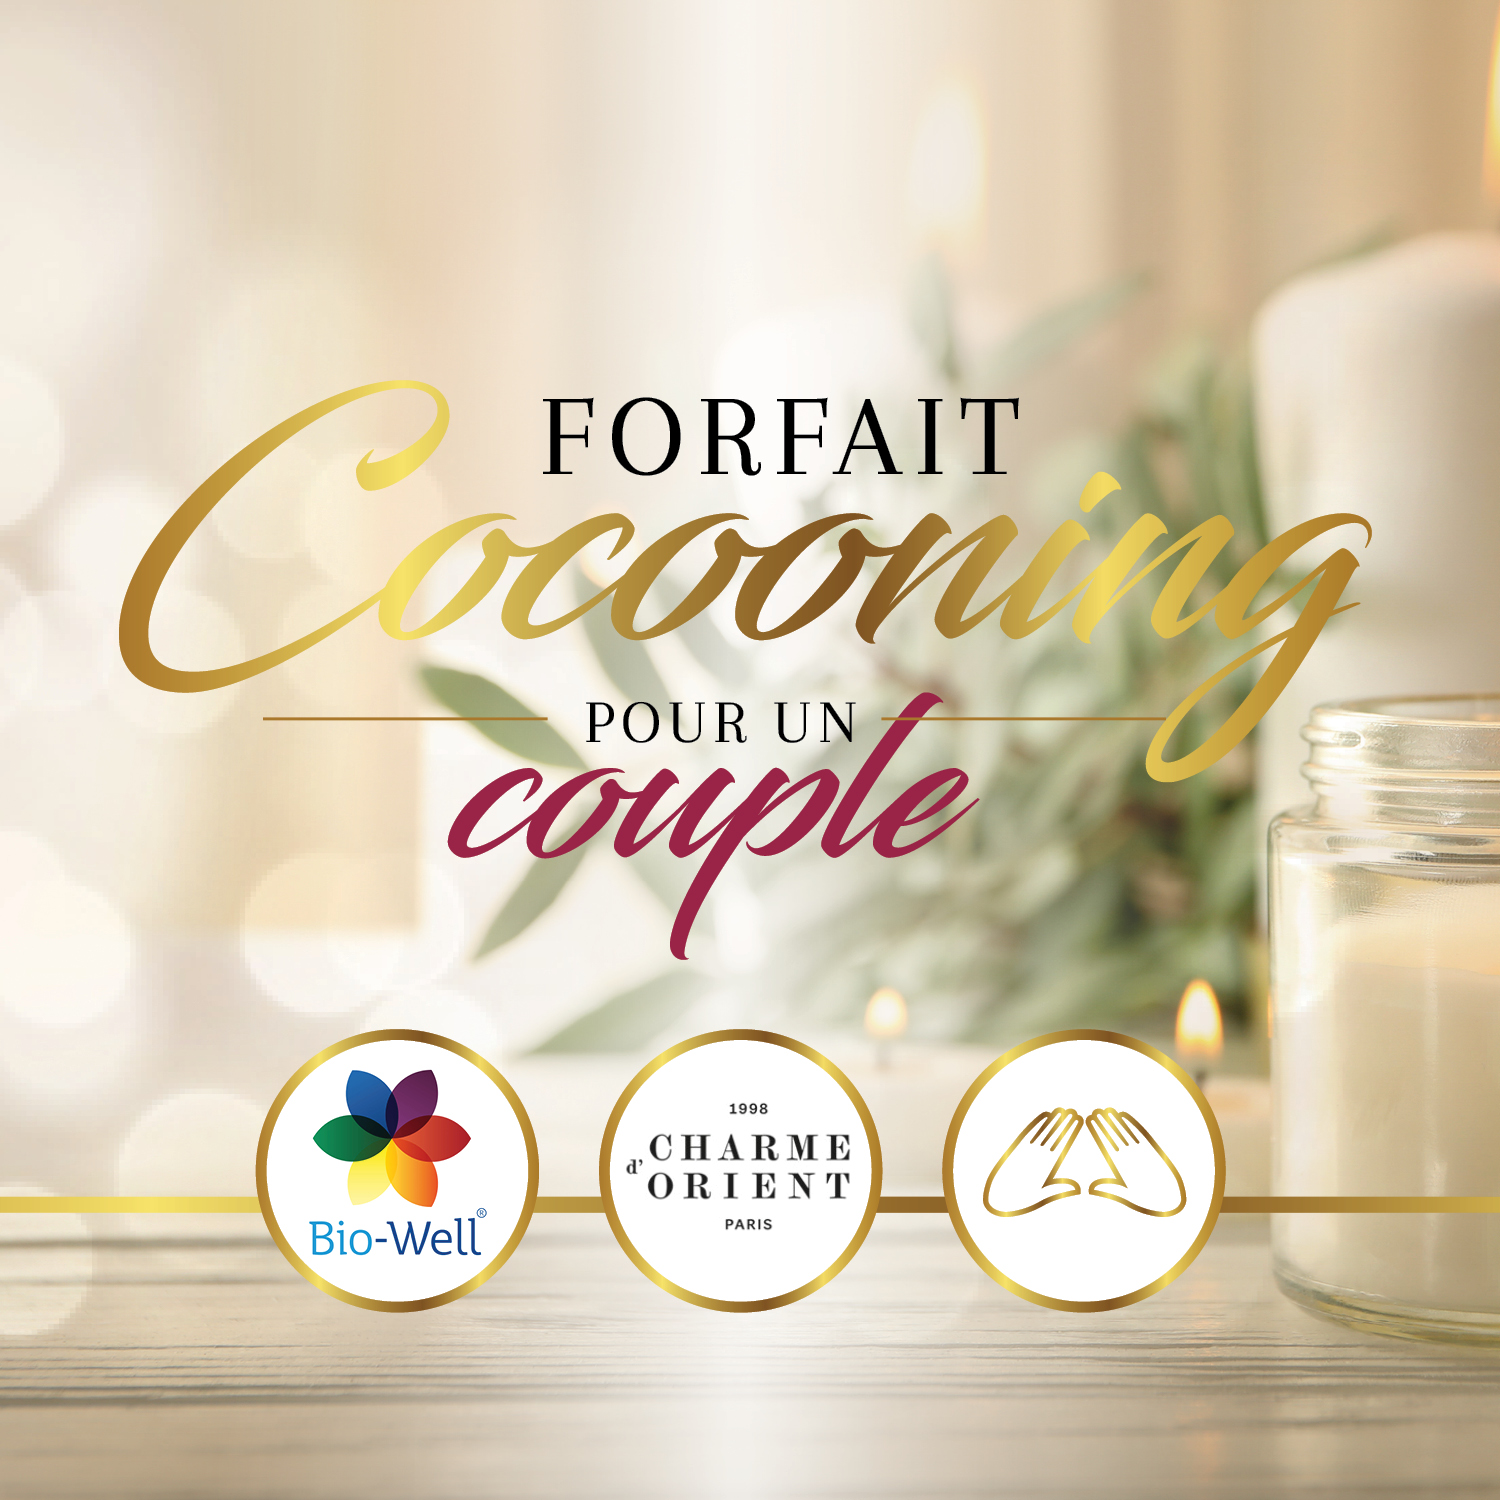 GHW_Forfait-Cocooning-couple_5x5